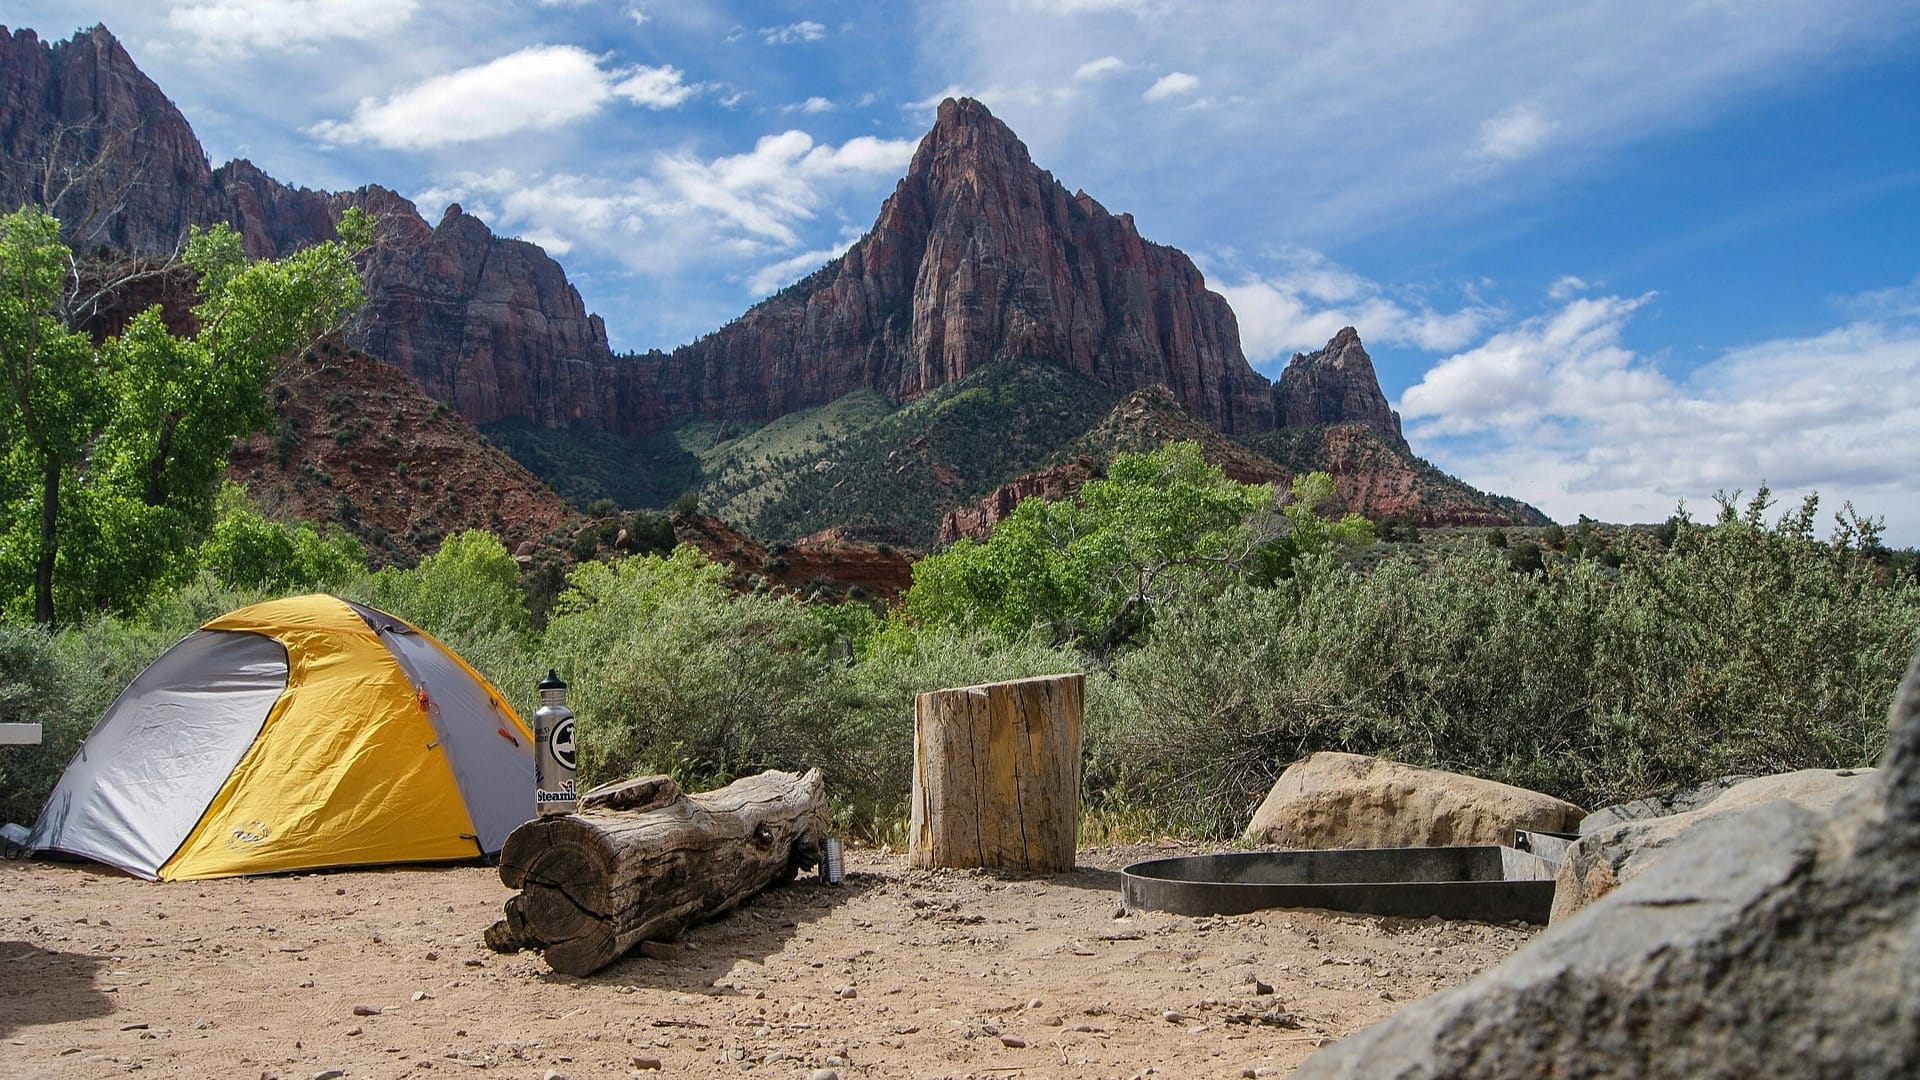 A campsite in Zion National Park with a tent, water bottle, and seating around the fire pit and large rock formations in the background.